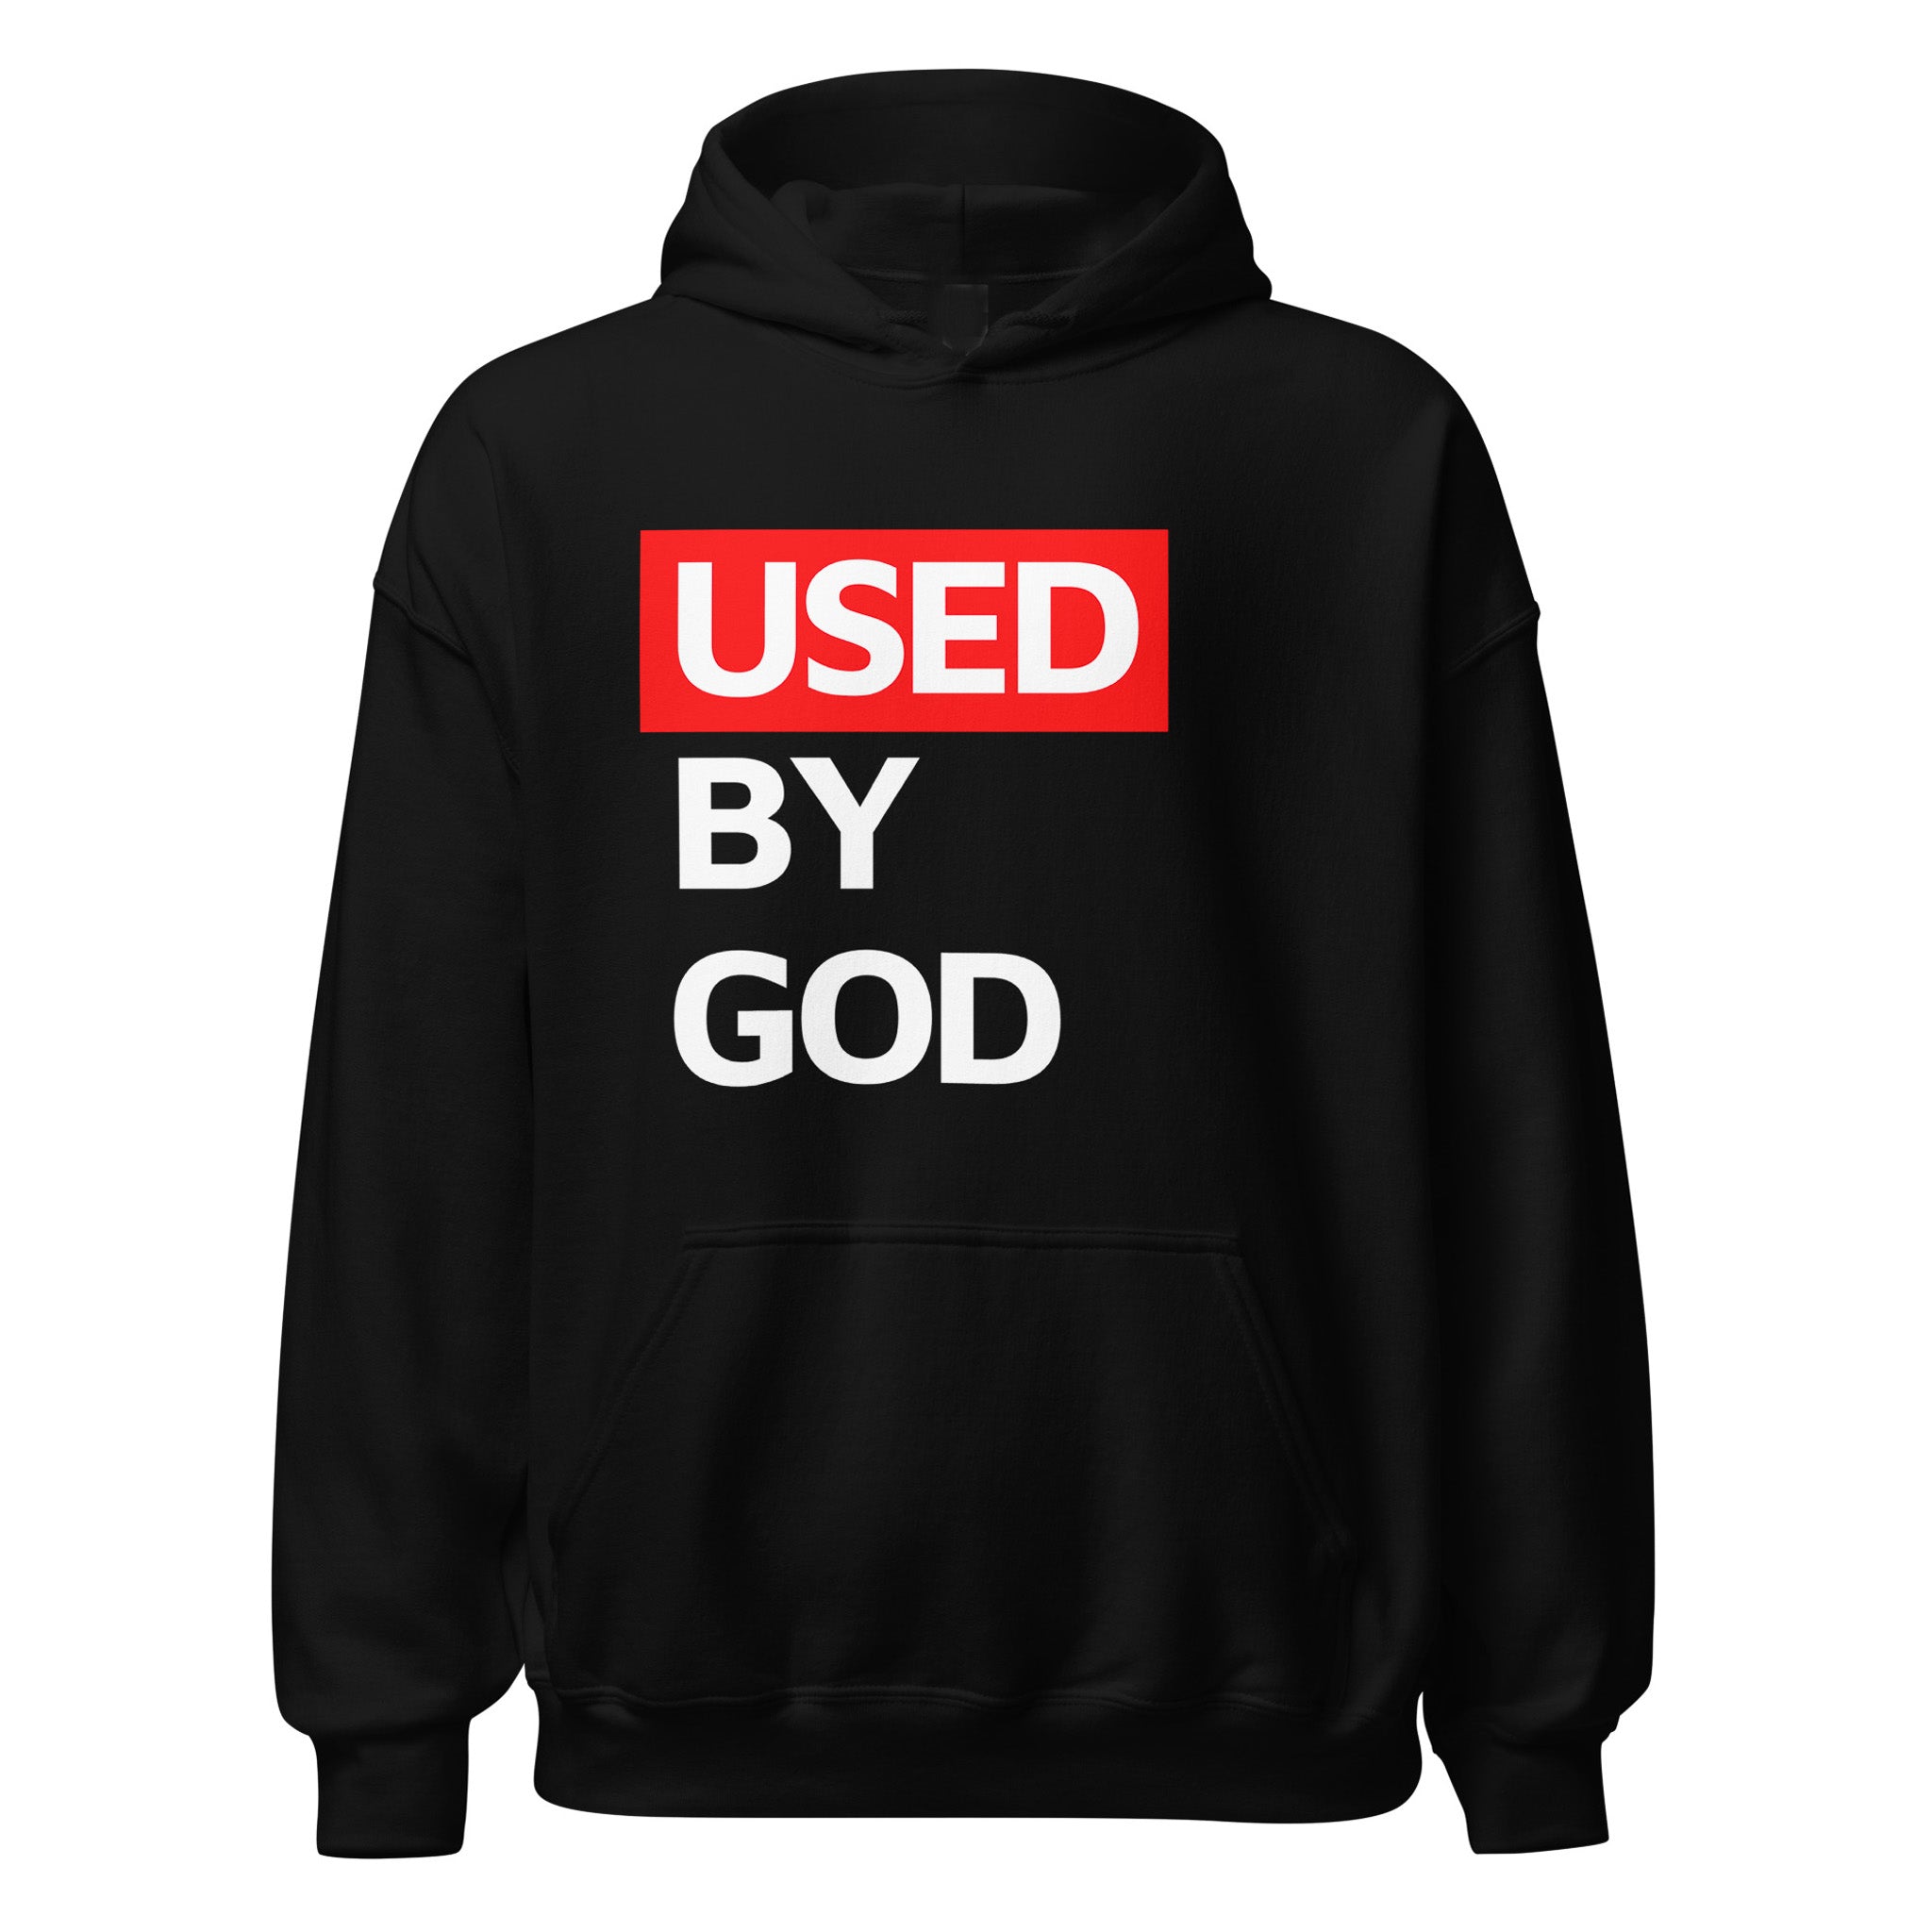 Be Bold, Used By God, Used By God Clothing, Christian Apparel, Christian Hoodies, Christian Clothing, Christian Shirts, God Shirts, Christian Sweatshirts, God Clothing, Jesus Hoodie, christian clothing t shirts, Jesus Clothes, t-shirts about jesus, hoodies near me, Christian Tshirts, God Is Dope, Art Of Homage, Red Letter Clothing, Elevated Faith, Active Faith Sports, Beacon Threads, God The Father Apparel